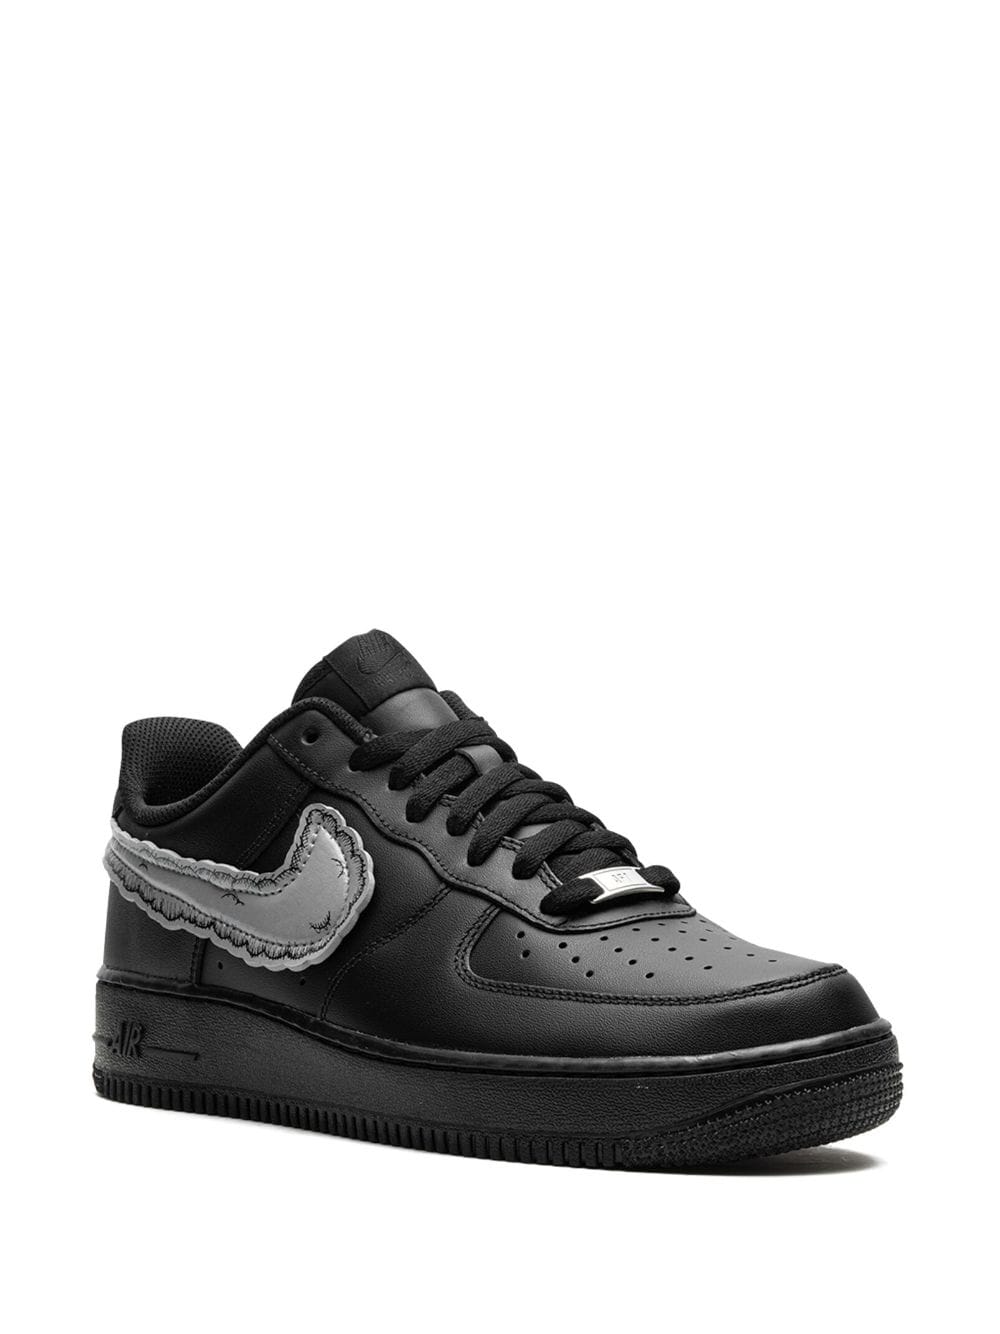 Image 2 of Nike x KAWS x Sky High Farms Air Force 1 Low "Black" sneakers